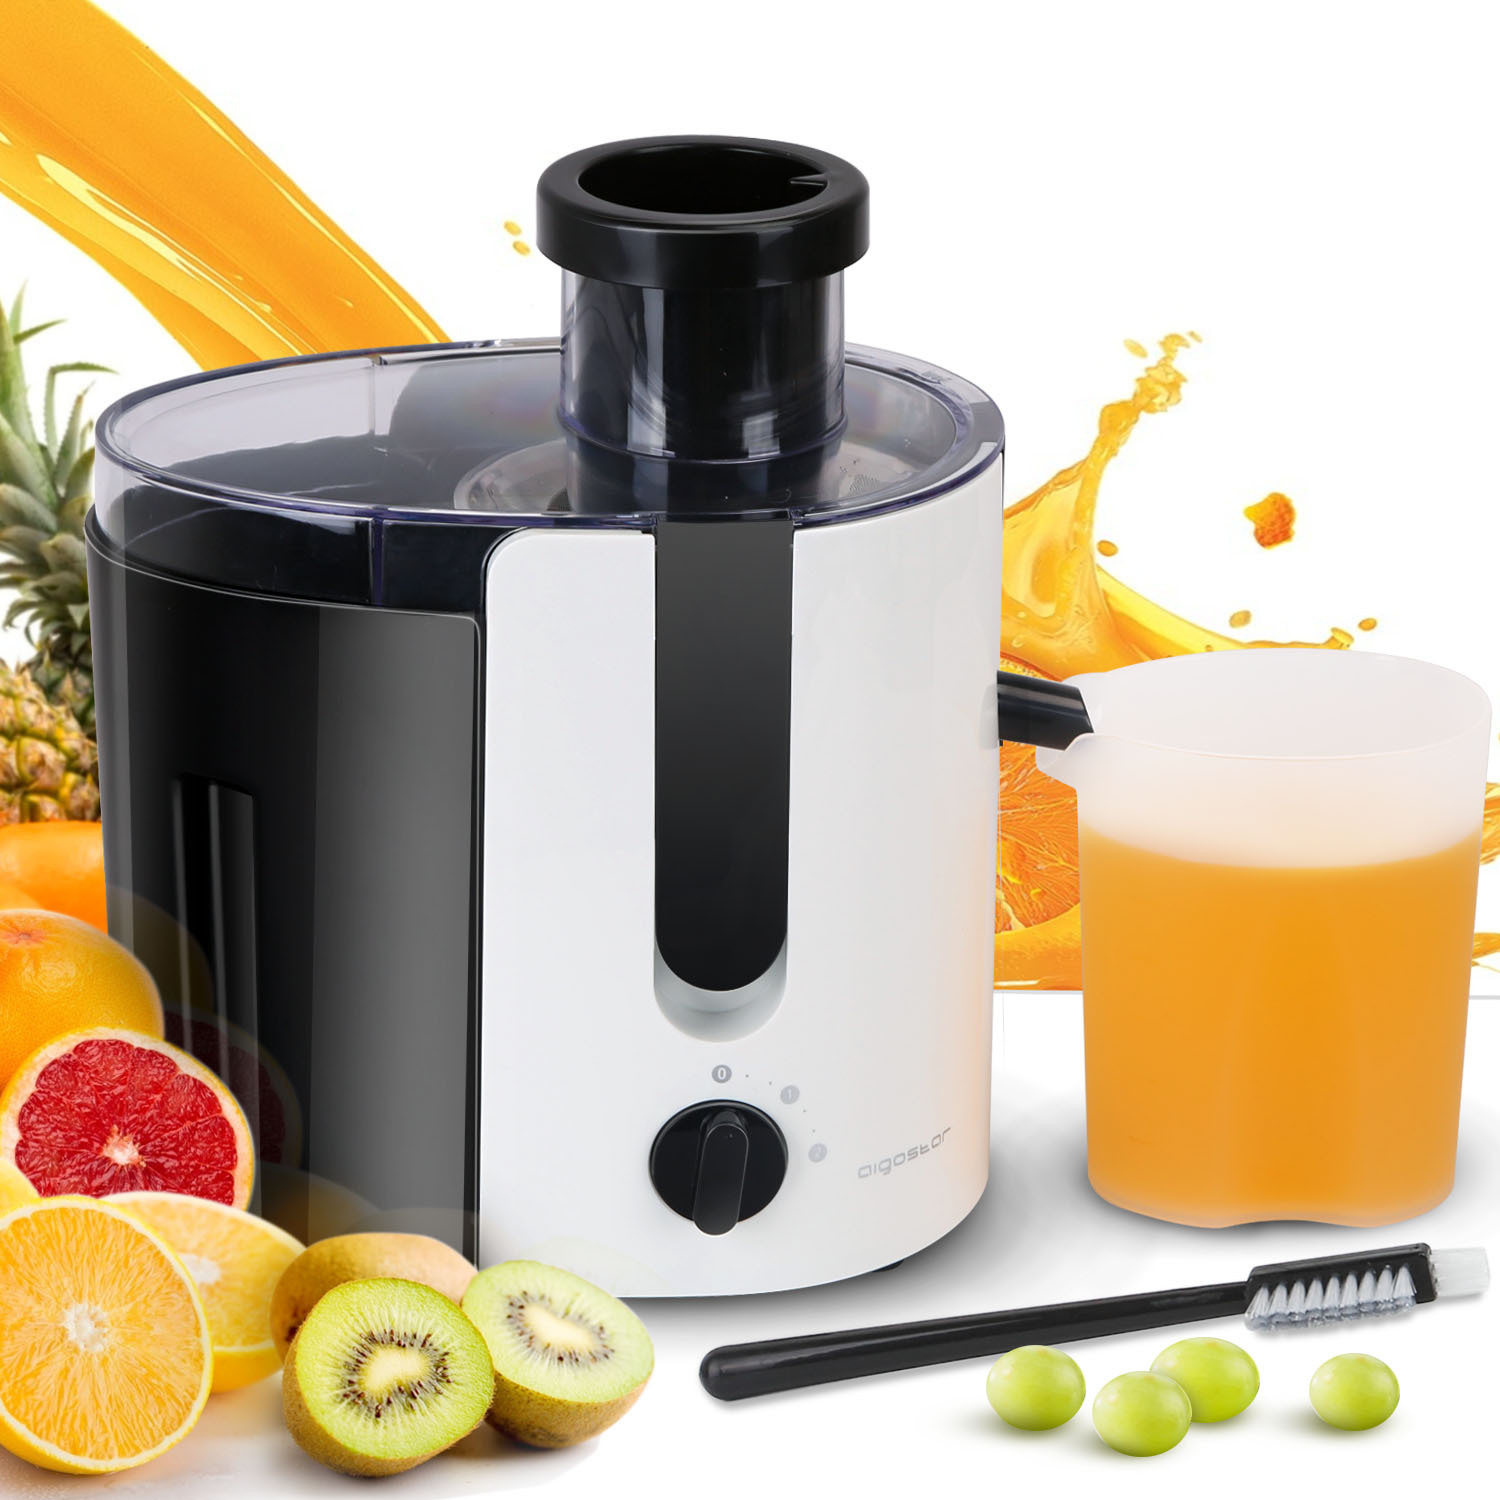 Aigostar Grape - Wide Mouth Juicers, Dual Speed Vegetable Juicer Extractor, Centrifugal Juicer Machine Easy Clean for Celery, Whole Fruit, Anti-drip, Stainless Steel and BPA-Free